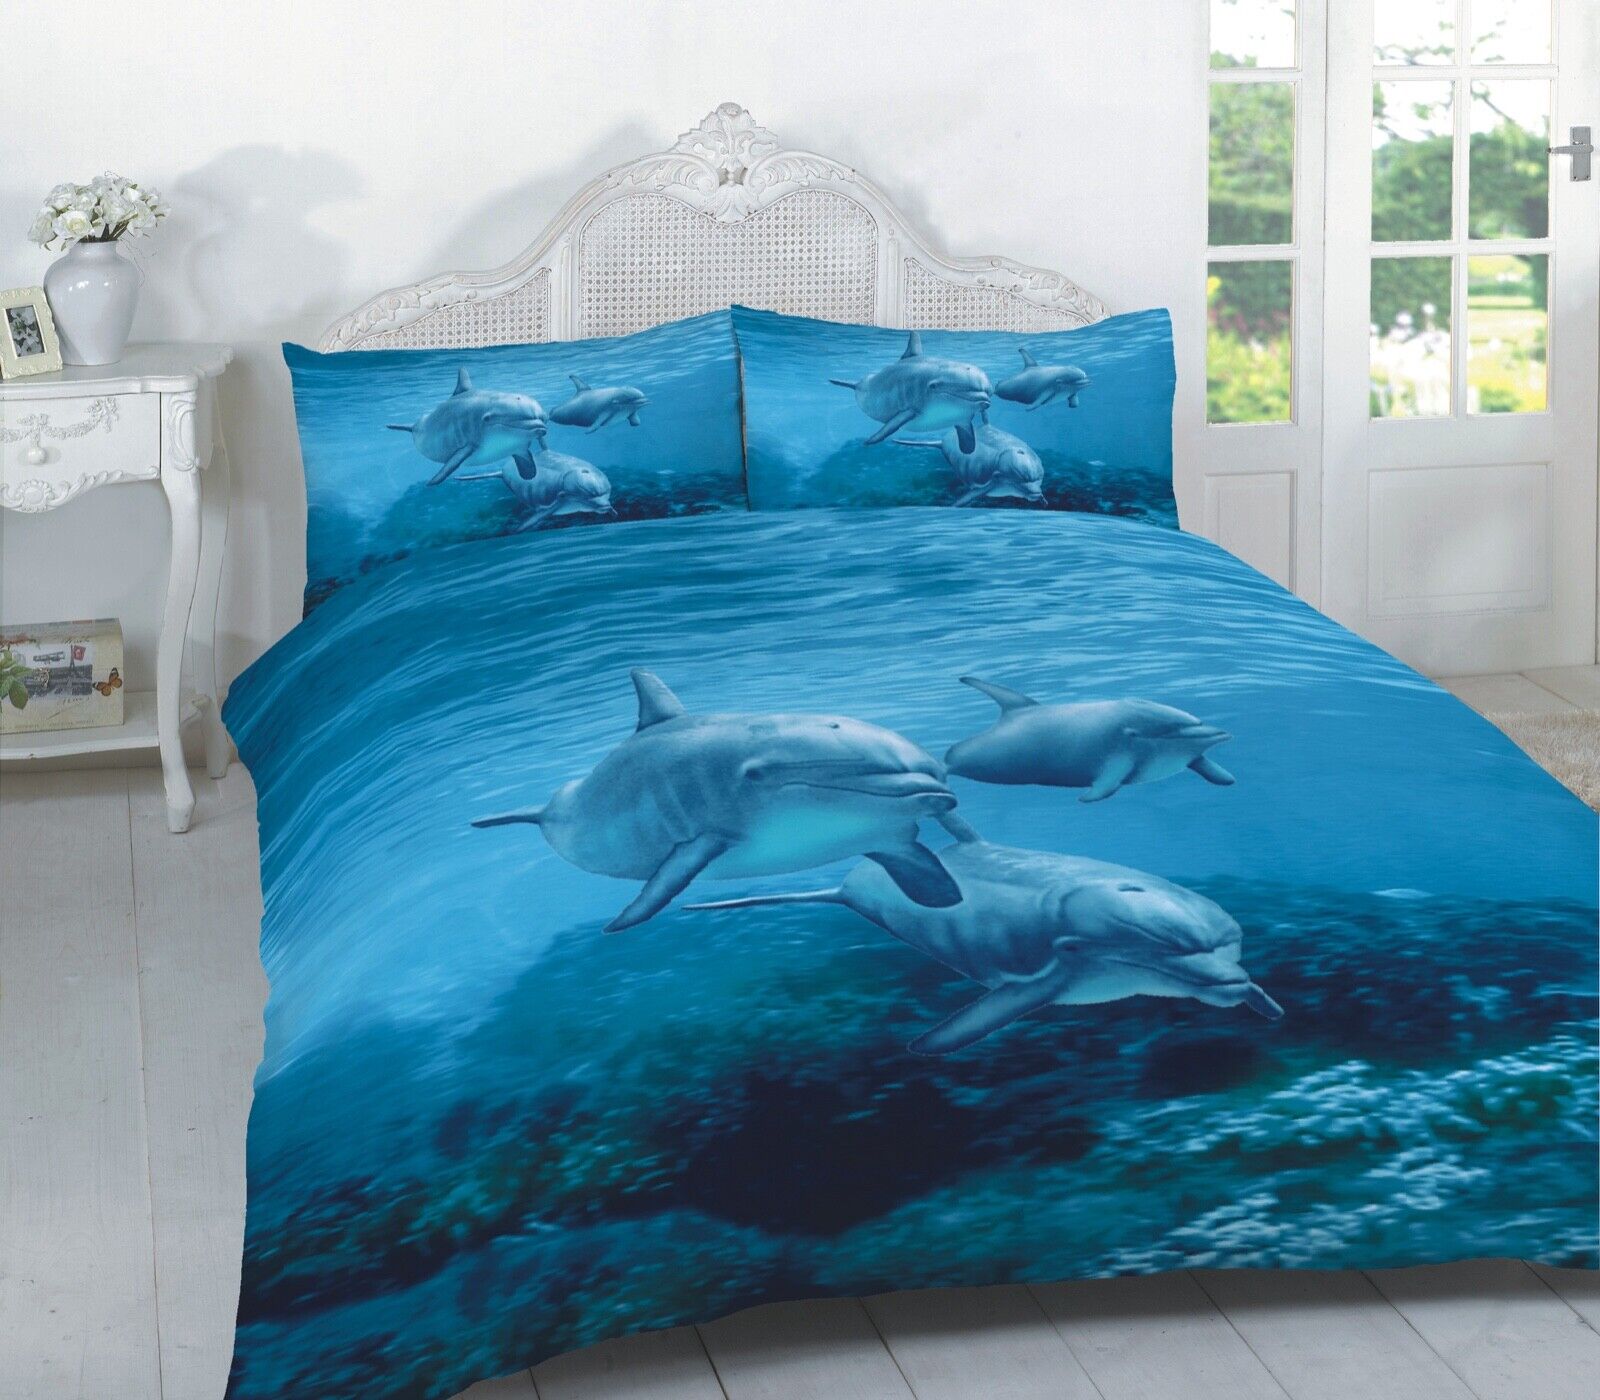 3d Animal Printed Duvet Quilt Cover With Pillow Case Sizes Single Double King Nowe tanie